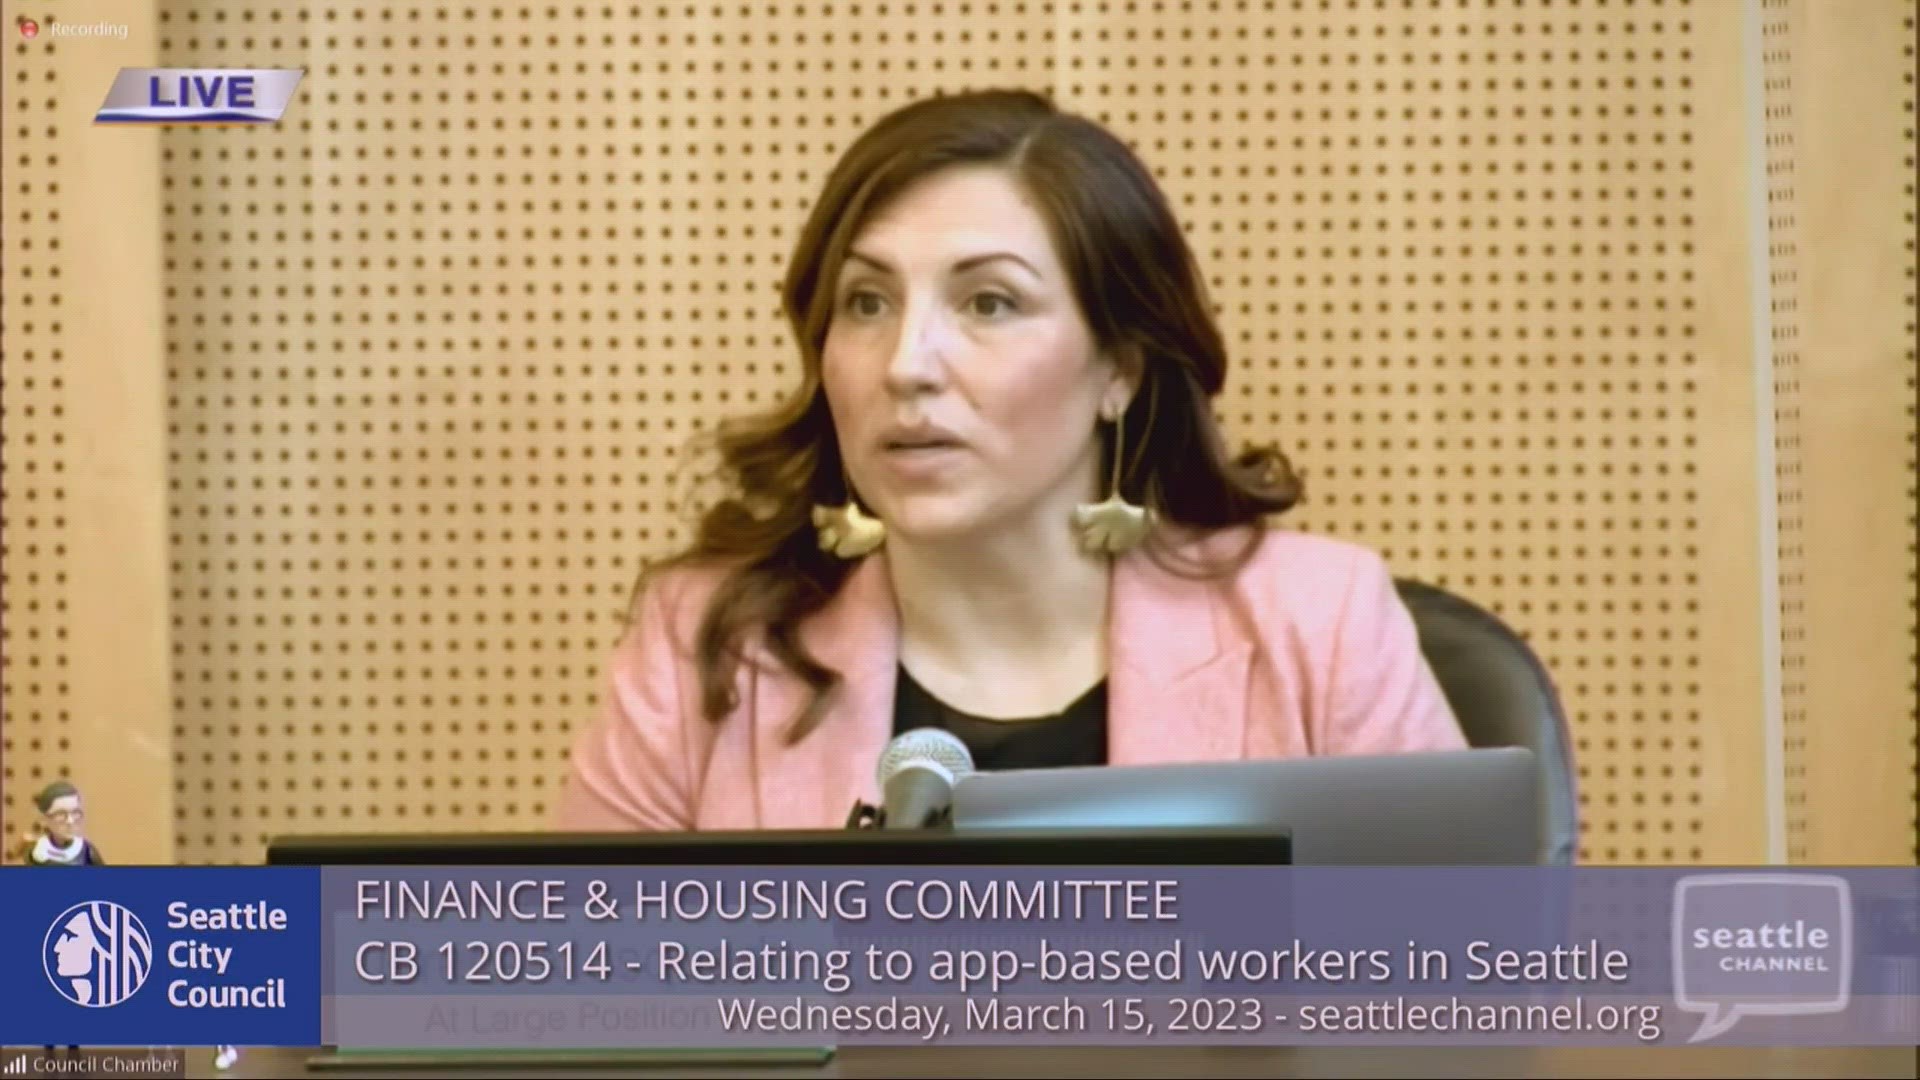 On Wednesday, the Finance and Housing Committee discussed legislation that would create permanent Paid Sick and Safe Time rights for app-based workers in Seattle.